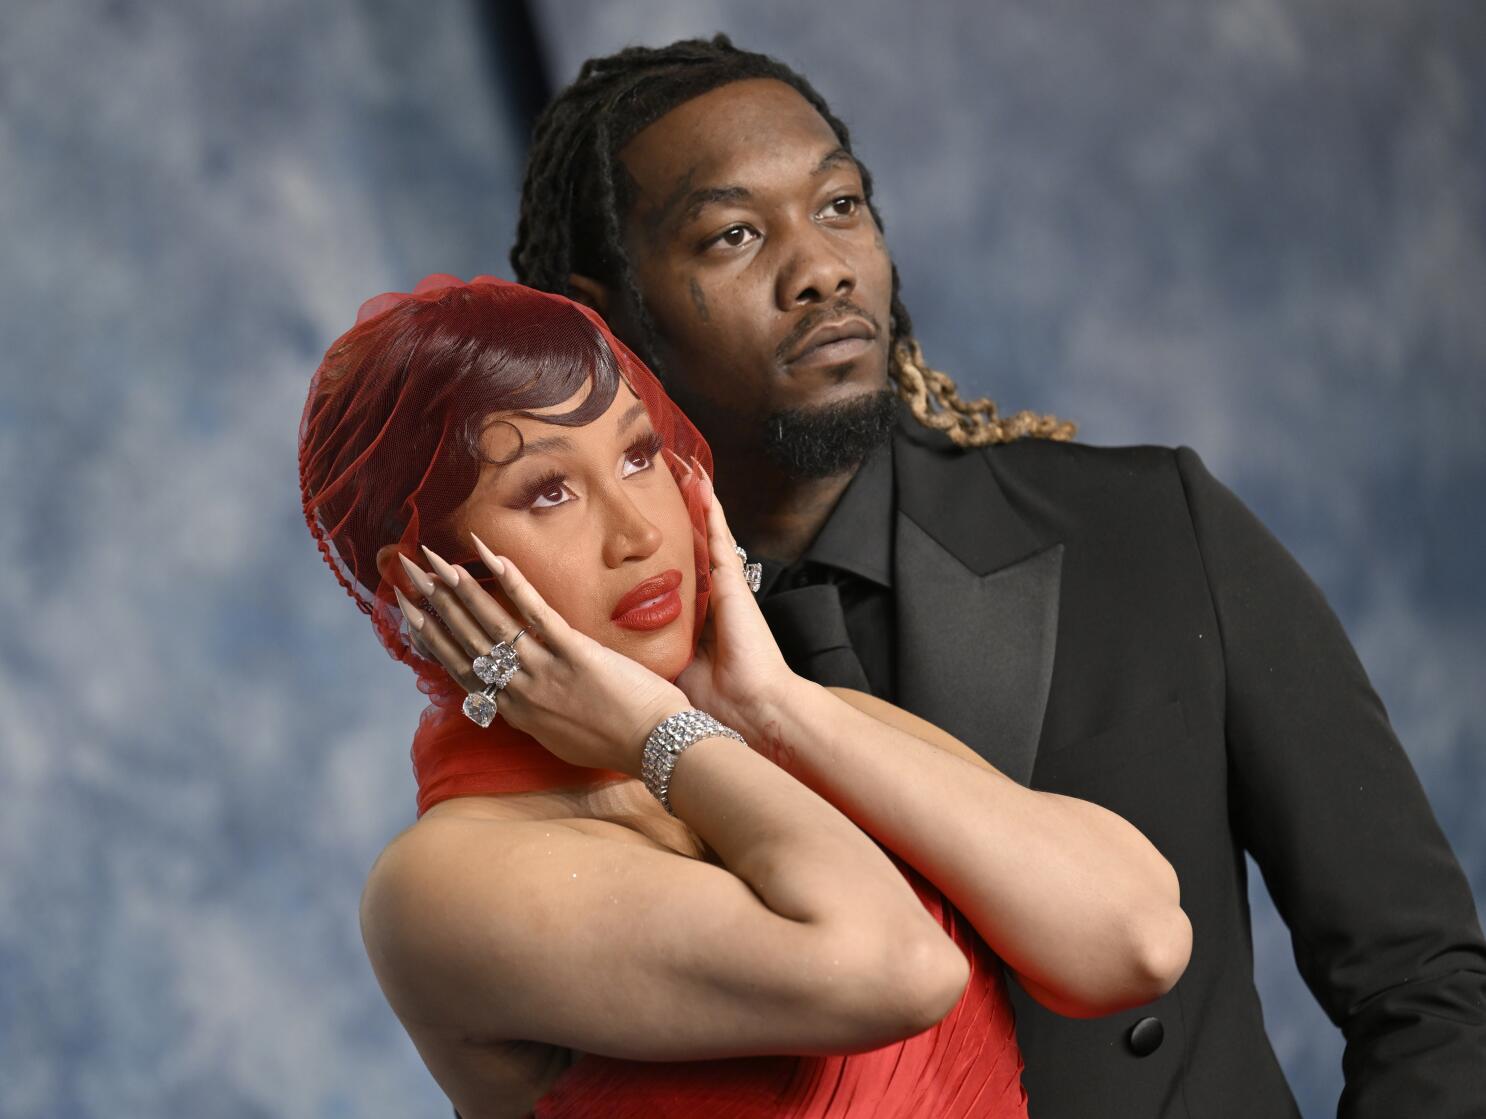 Cardi B responds to Offset's cheating allegations - Los Angeles Times